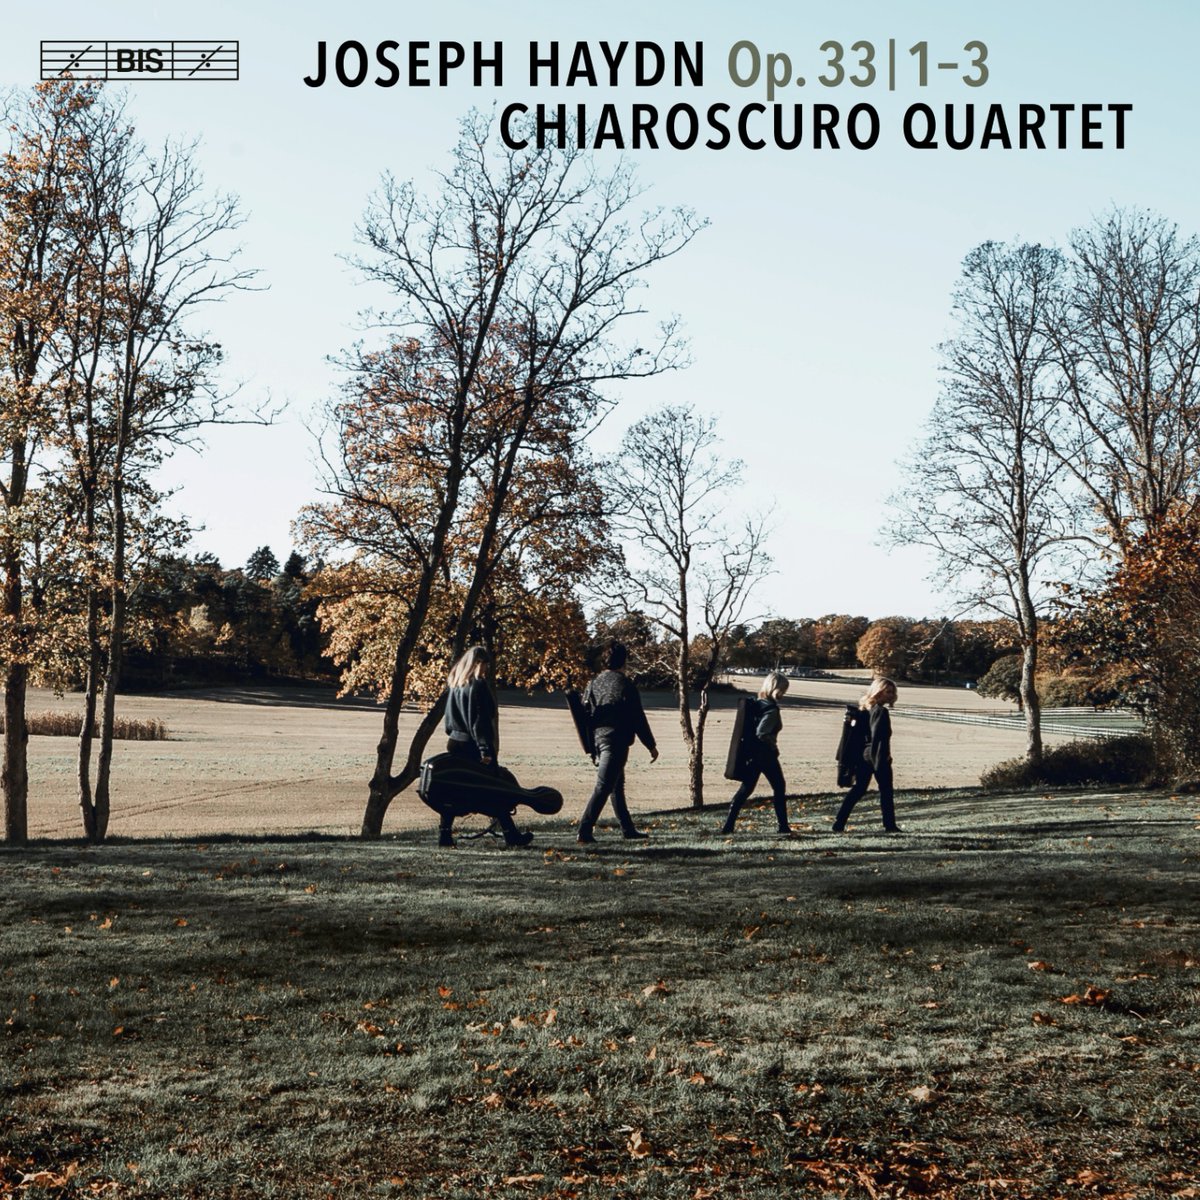 We are thrilled to announce that the Haydn String Quartets by @Chiaroscuro4tet is both a Diapason d’or of the Year and @classicamag Choc de Classica of the Year! Link to this wonderful album: bisrecords.lnk.to/2588 #ClassicalMusic